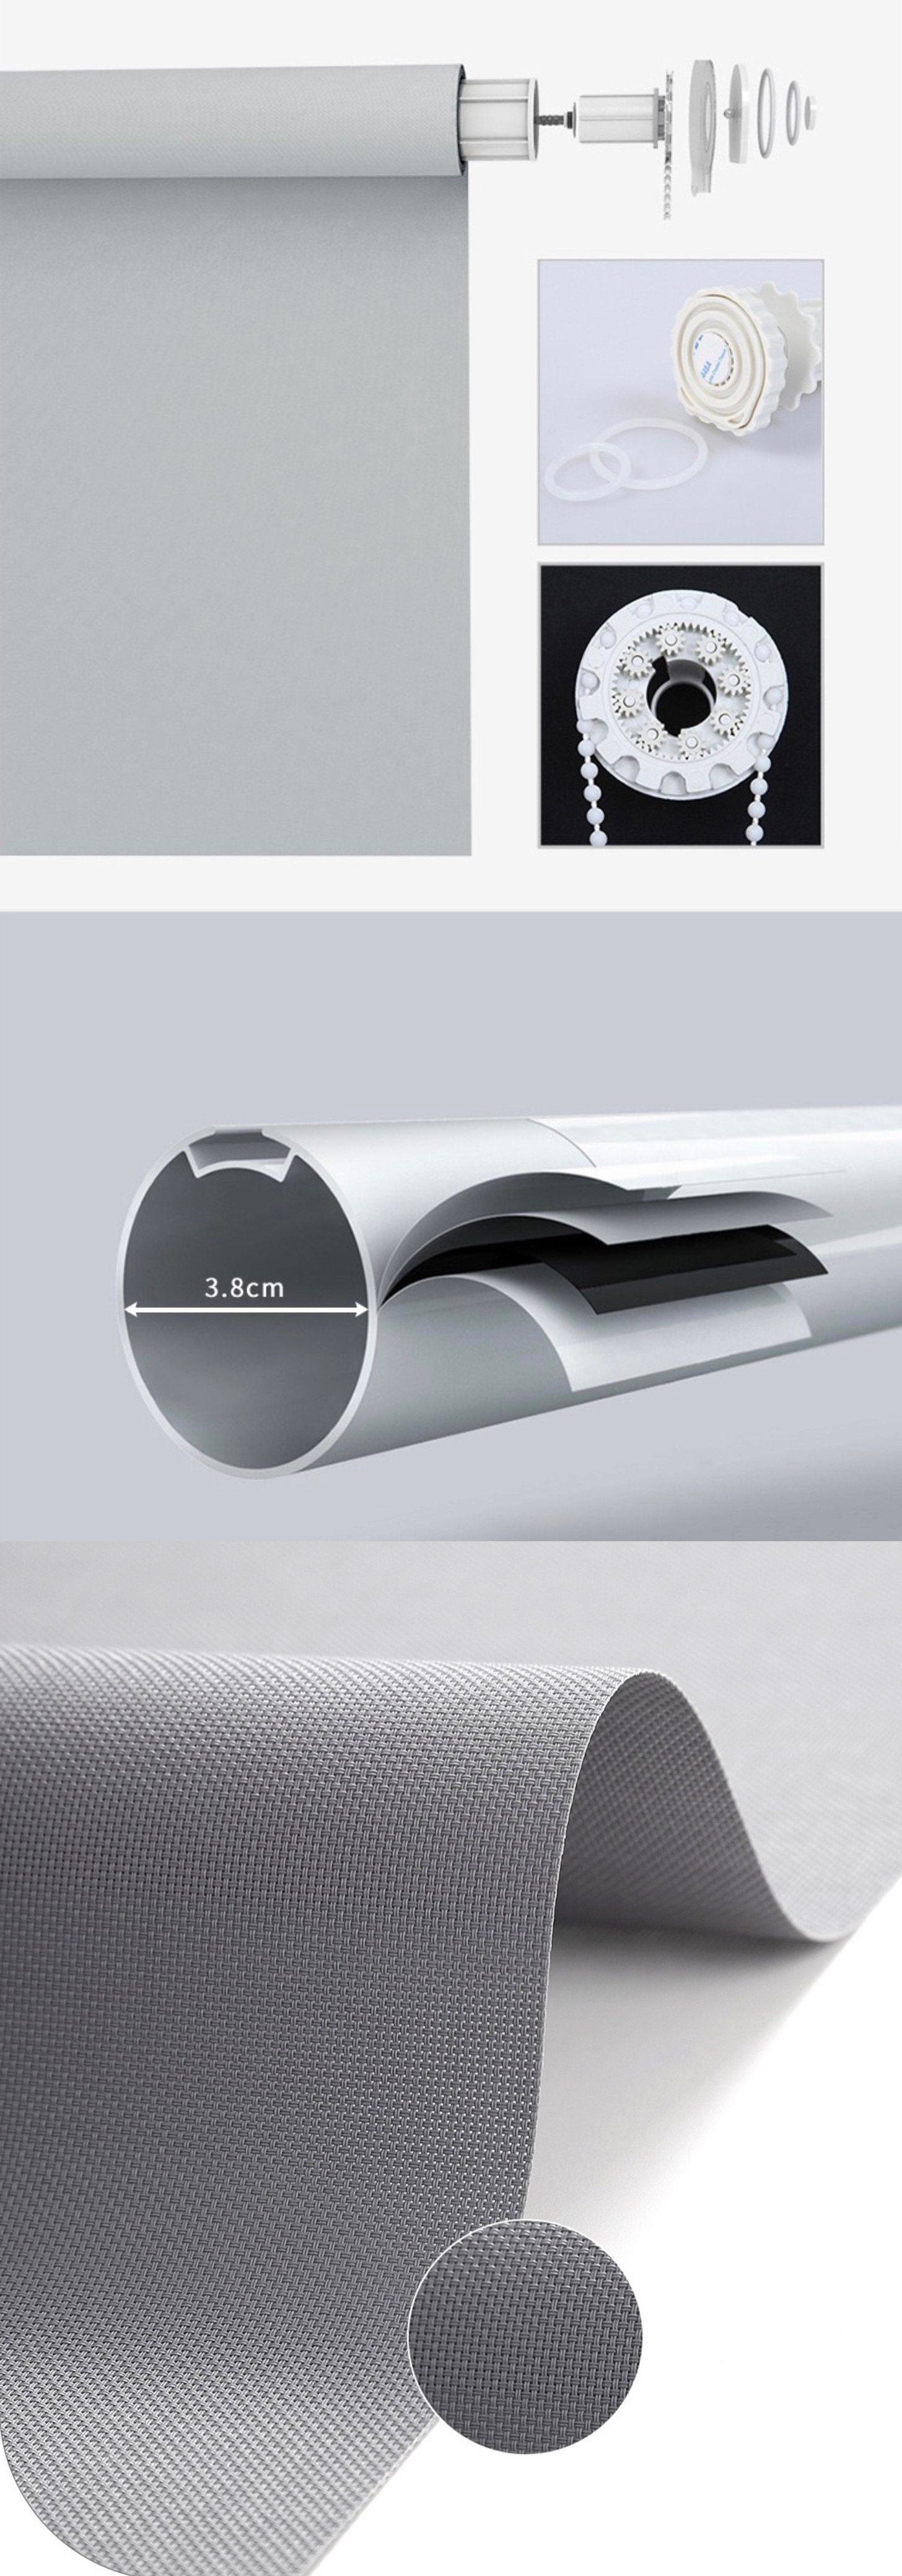 Blackout Roller Shade Continuous Loop Chain System